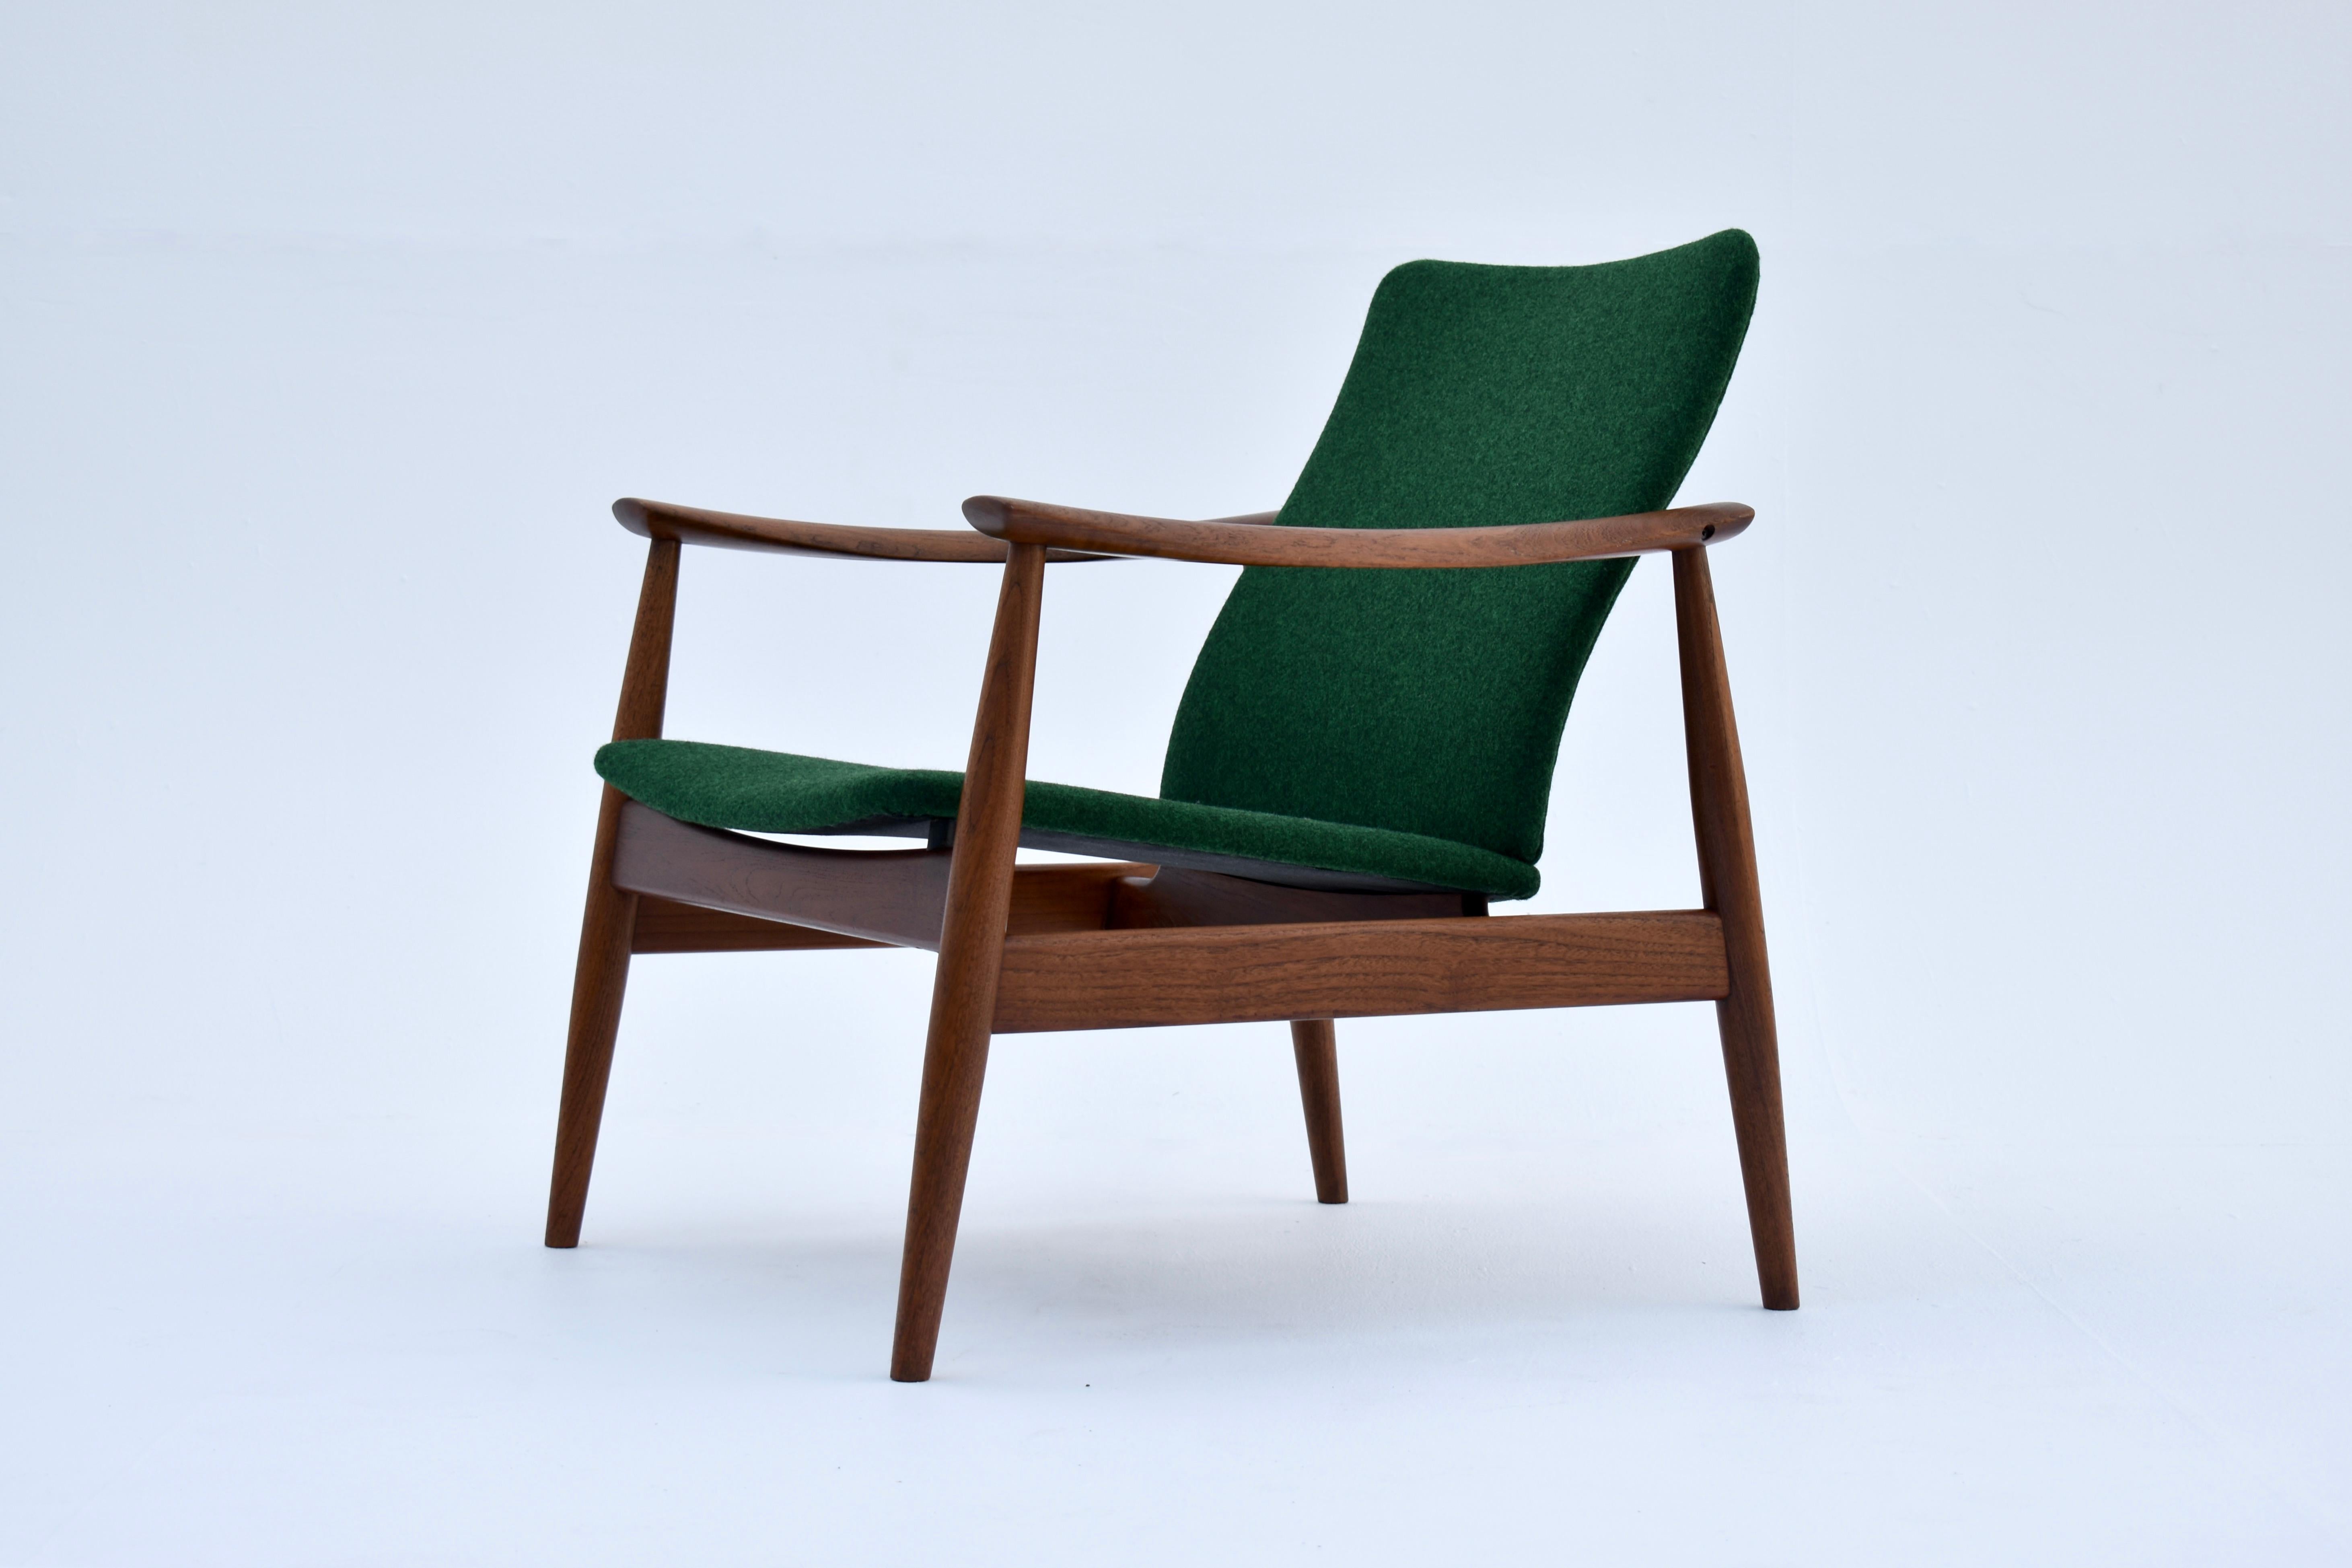 An outstanding Model 138 solid Teak lounge chair designed in the late 50’s by Finn Juhl.

This is one of our own personal favourite chairs and we often think this design has a stronger Japanese aesthetic than the Model 137 Japan Chair.

This design